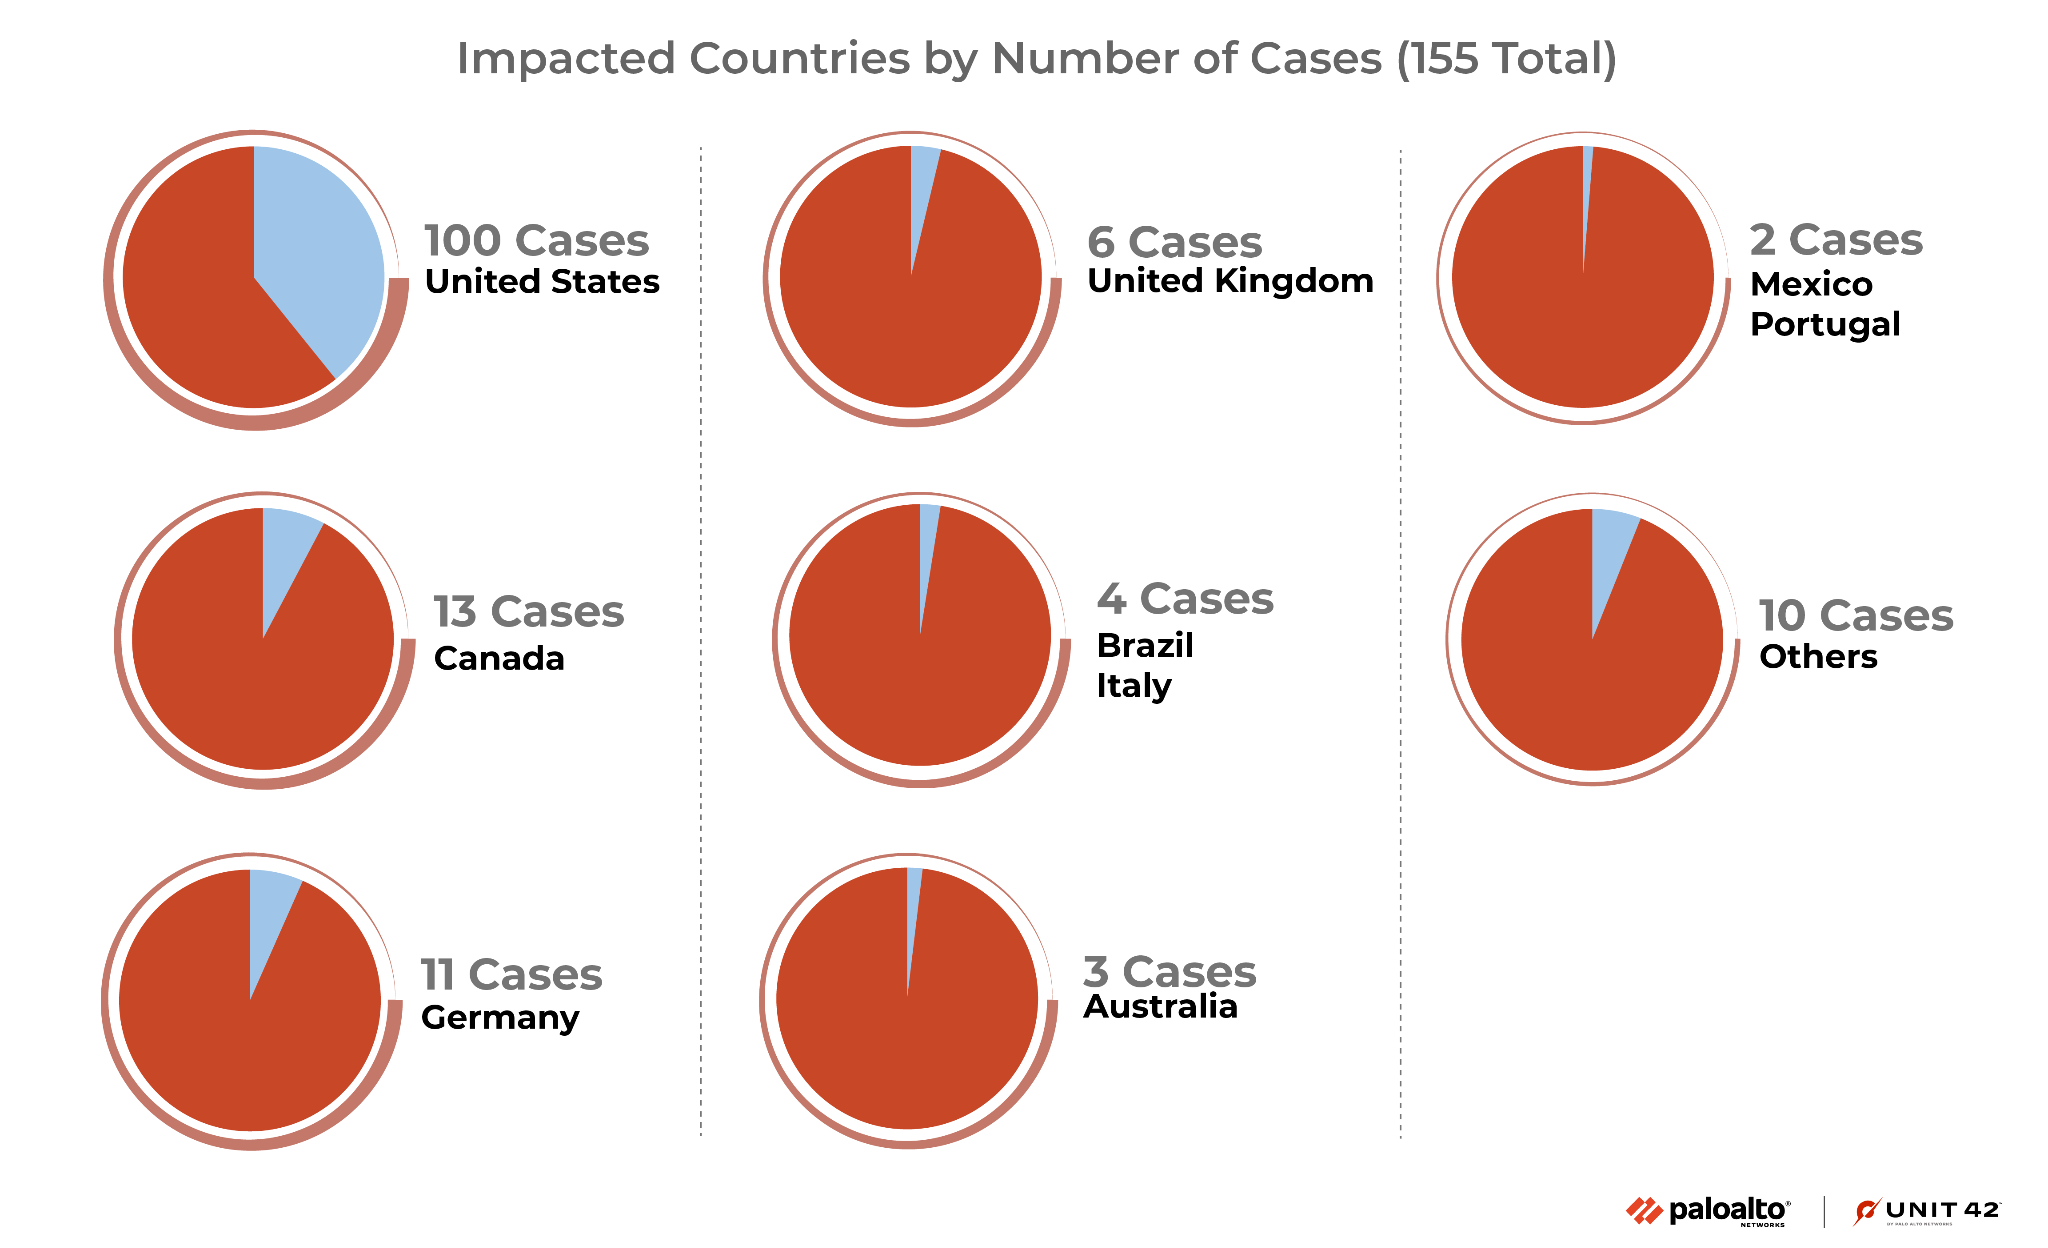 Figure 4 is a graph of countries impacted by Royal Ransomware by number of cases, with 155 total. The United States was impacted the most at 100 cases, followed by Canada with 13, and Germany with 11. The lowest case count is Mexico and Portugal at two cases each.